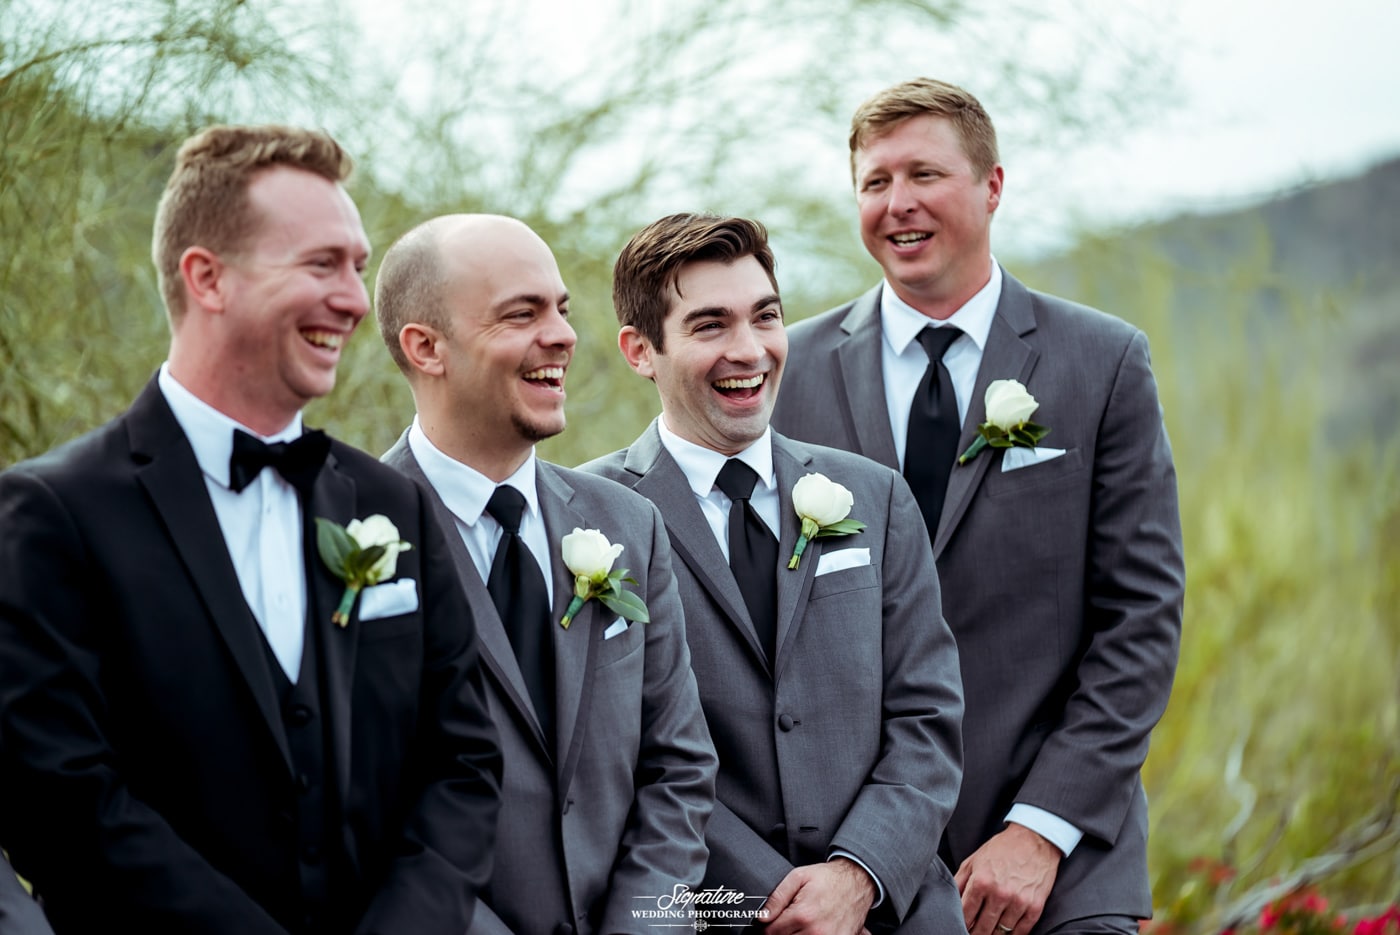 Groom and groomsmen laughing candid